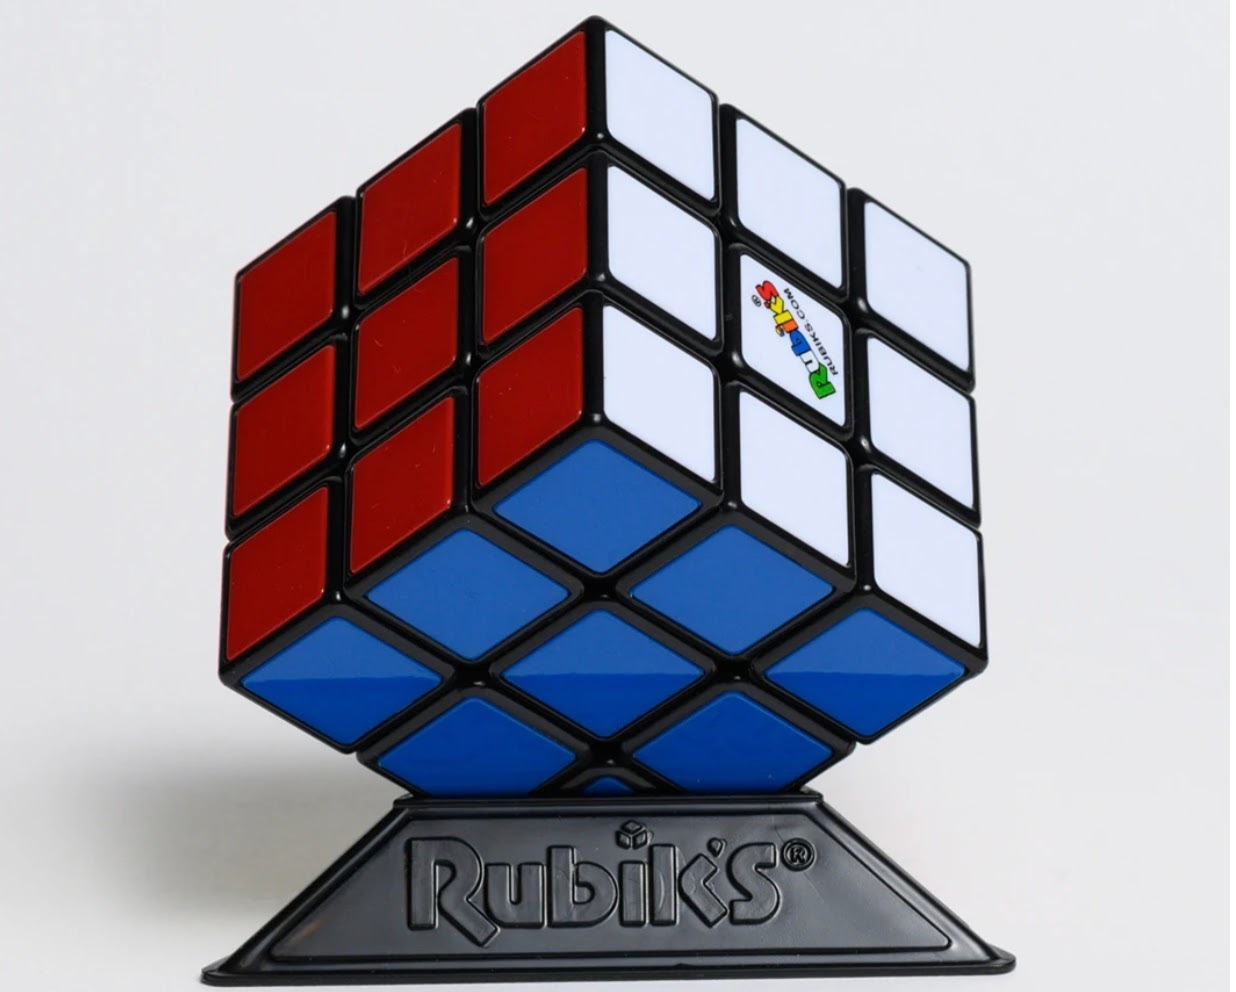 Rubik's Cube available in the SPYSCAPE shop